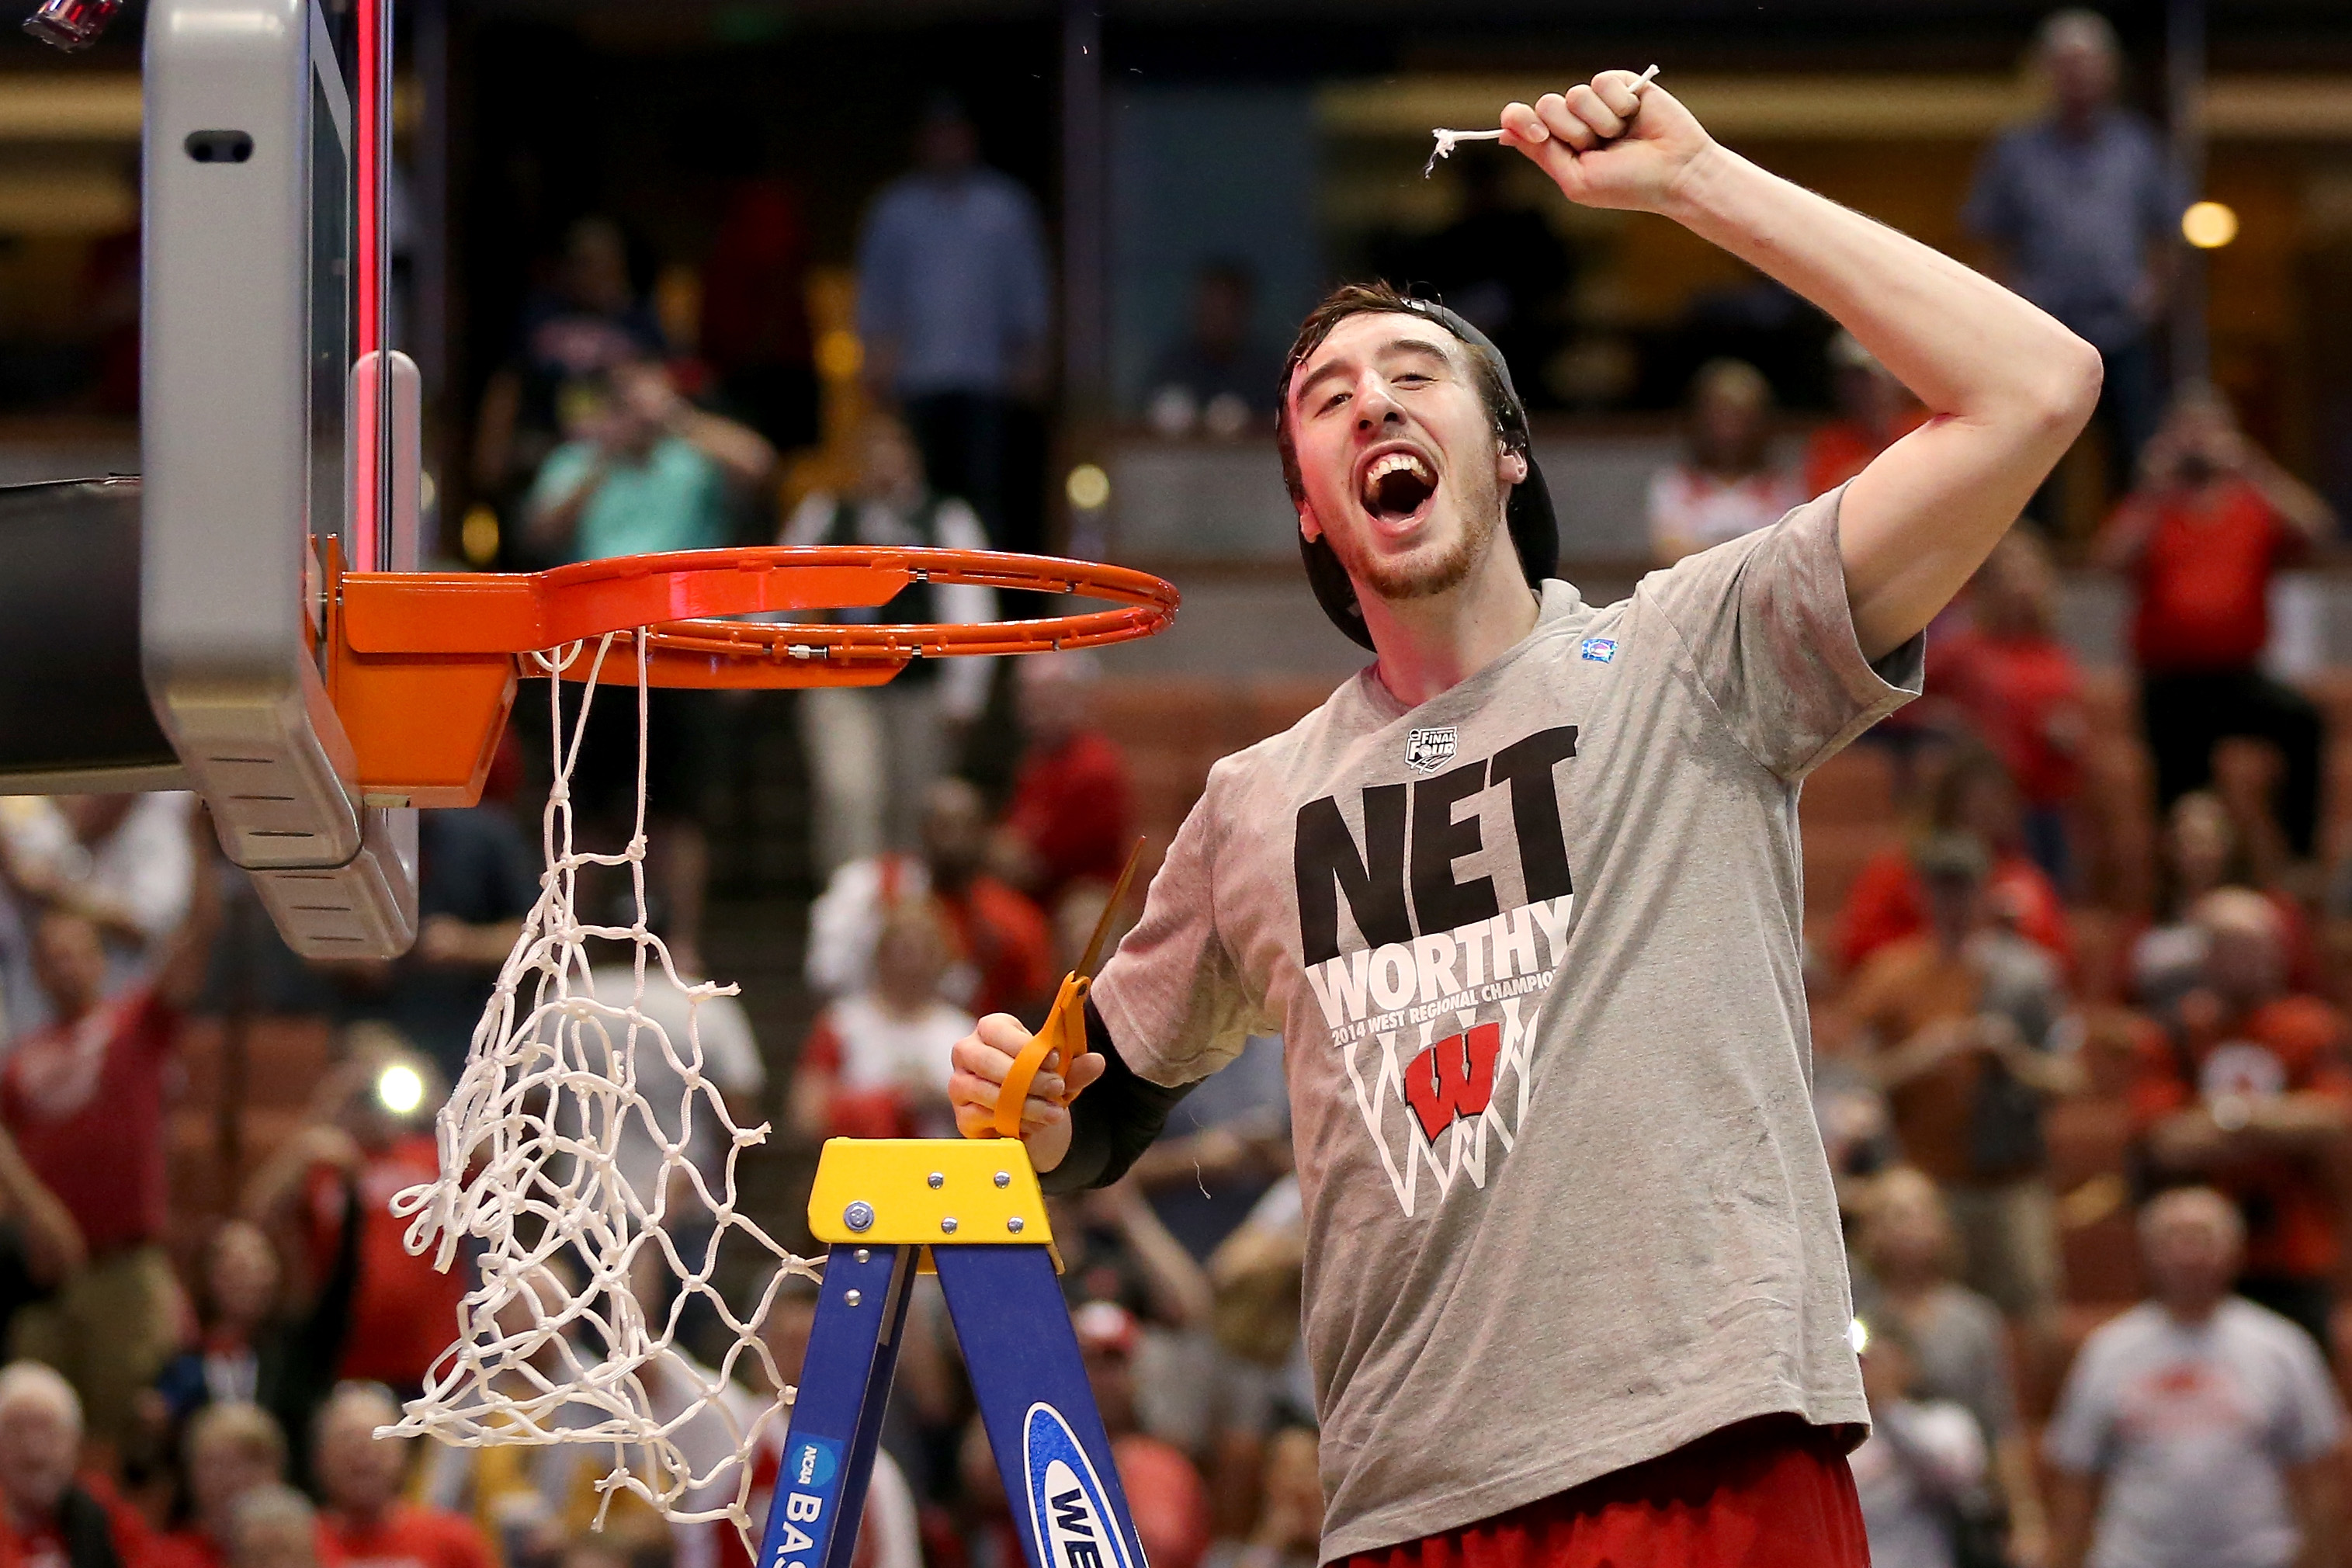 Wisconsin survives chaotic overtime, controversial calls to reach Final Four